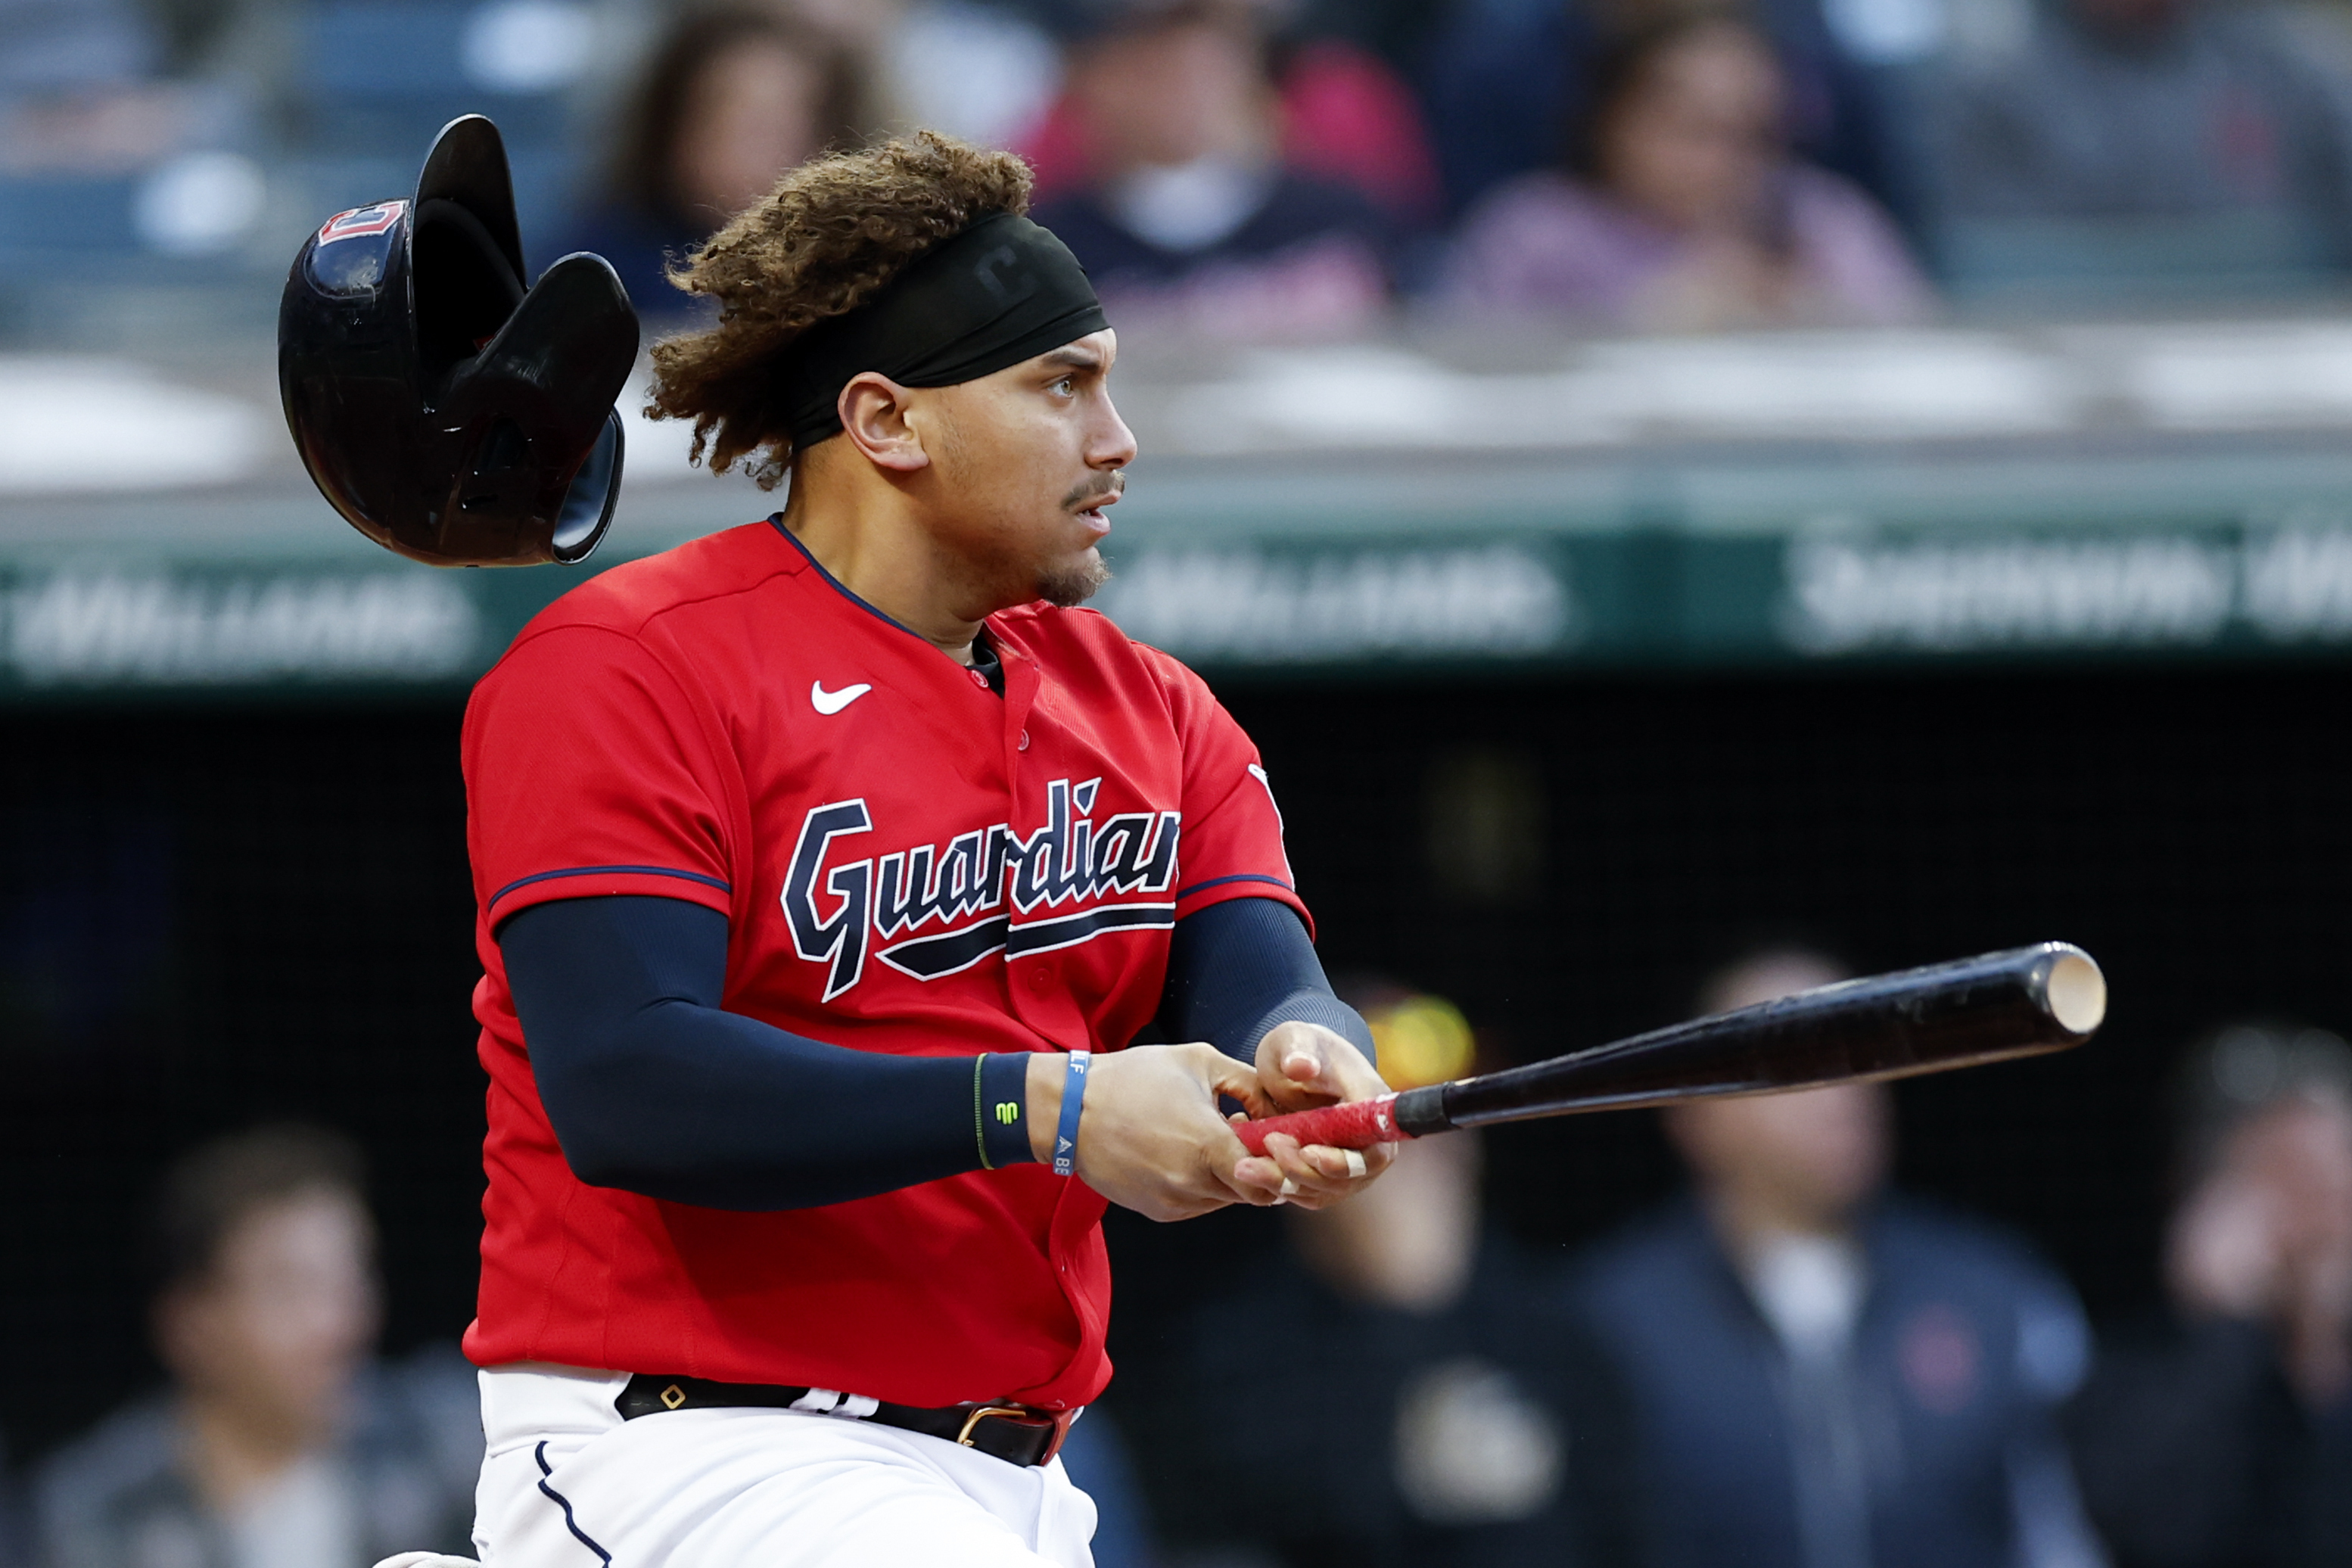 Tempers flare as Cleveland Indians lose to Boston, 3-1 